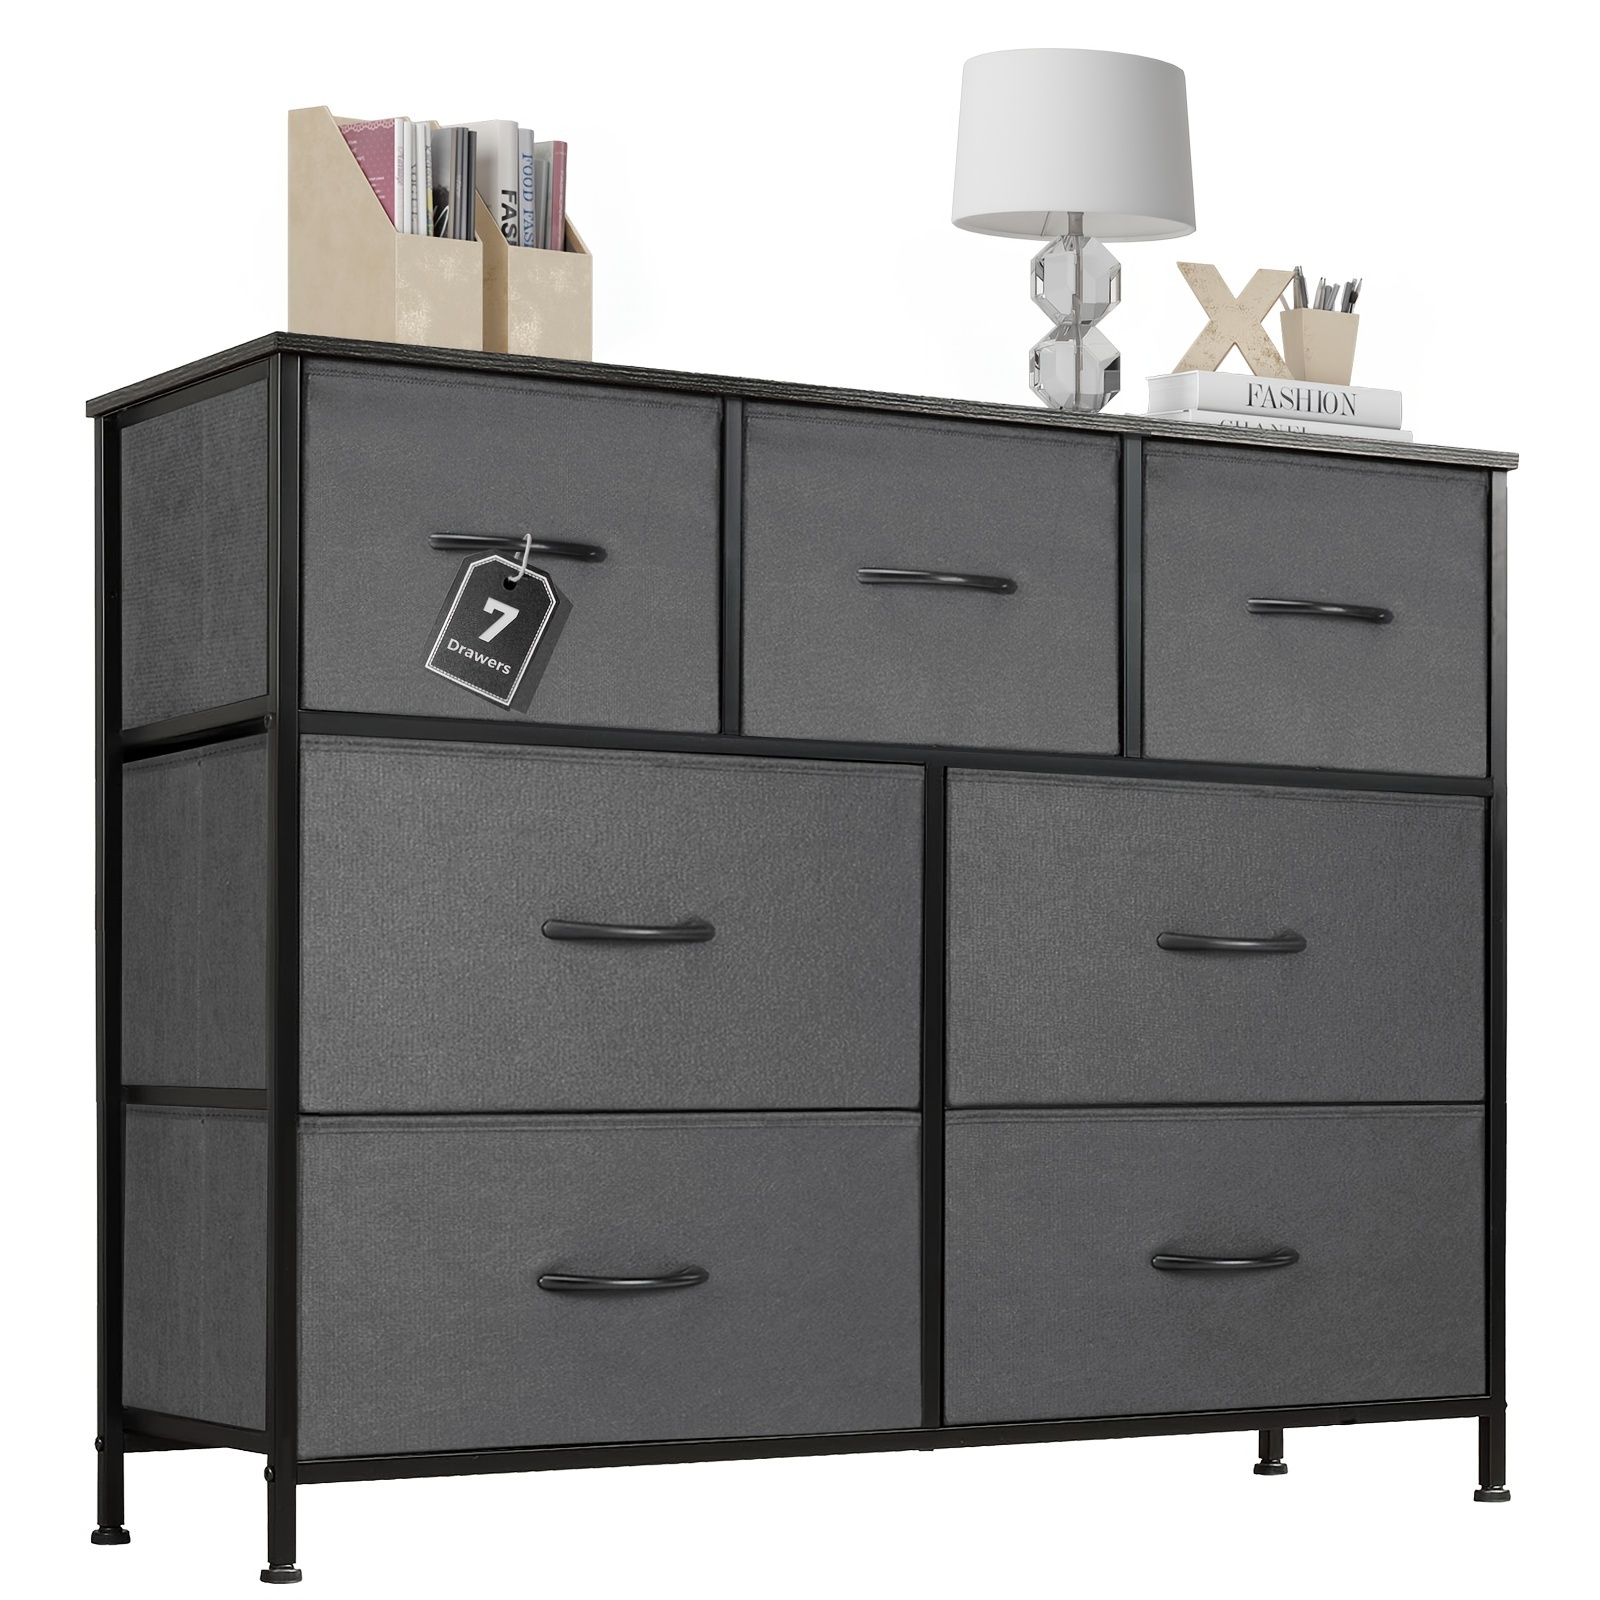 

Dresser For Bedroom With 7 Drawers, Clothes Drawer Fabric Closet Organizer, Dresser With Metal Frame And Wood Tabletop, Chest Storage Tower For Living Room, Entryway